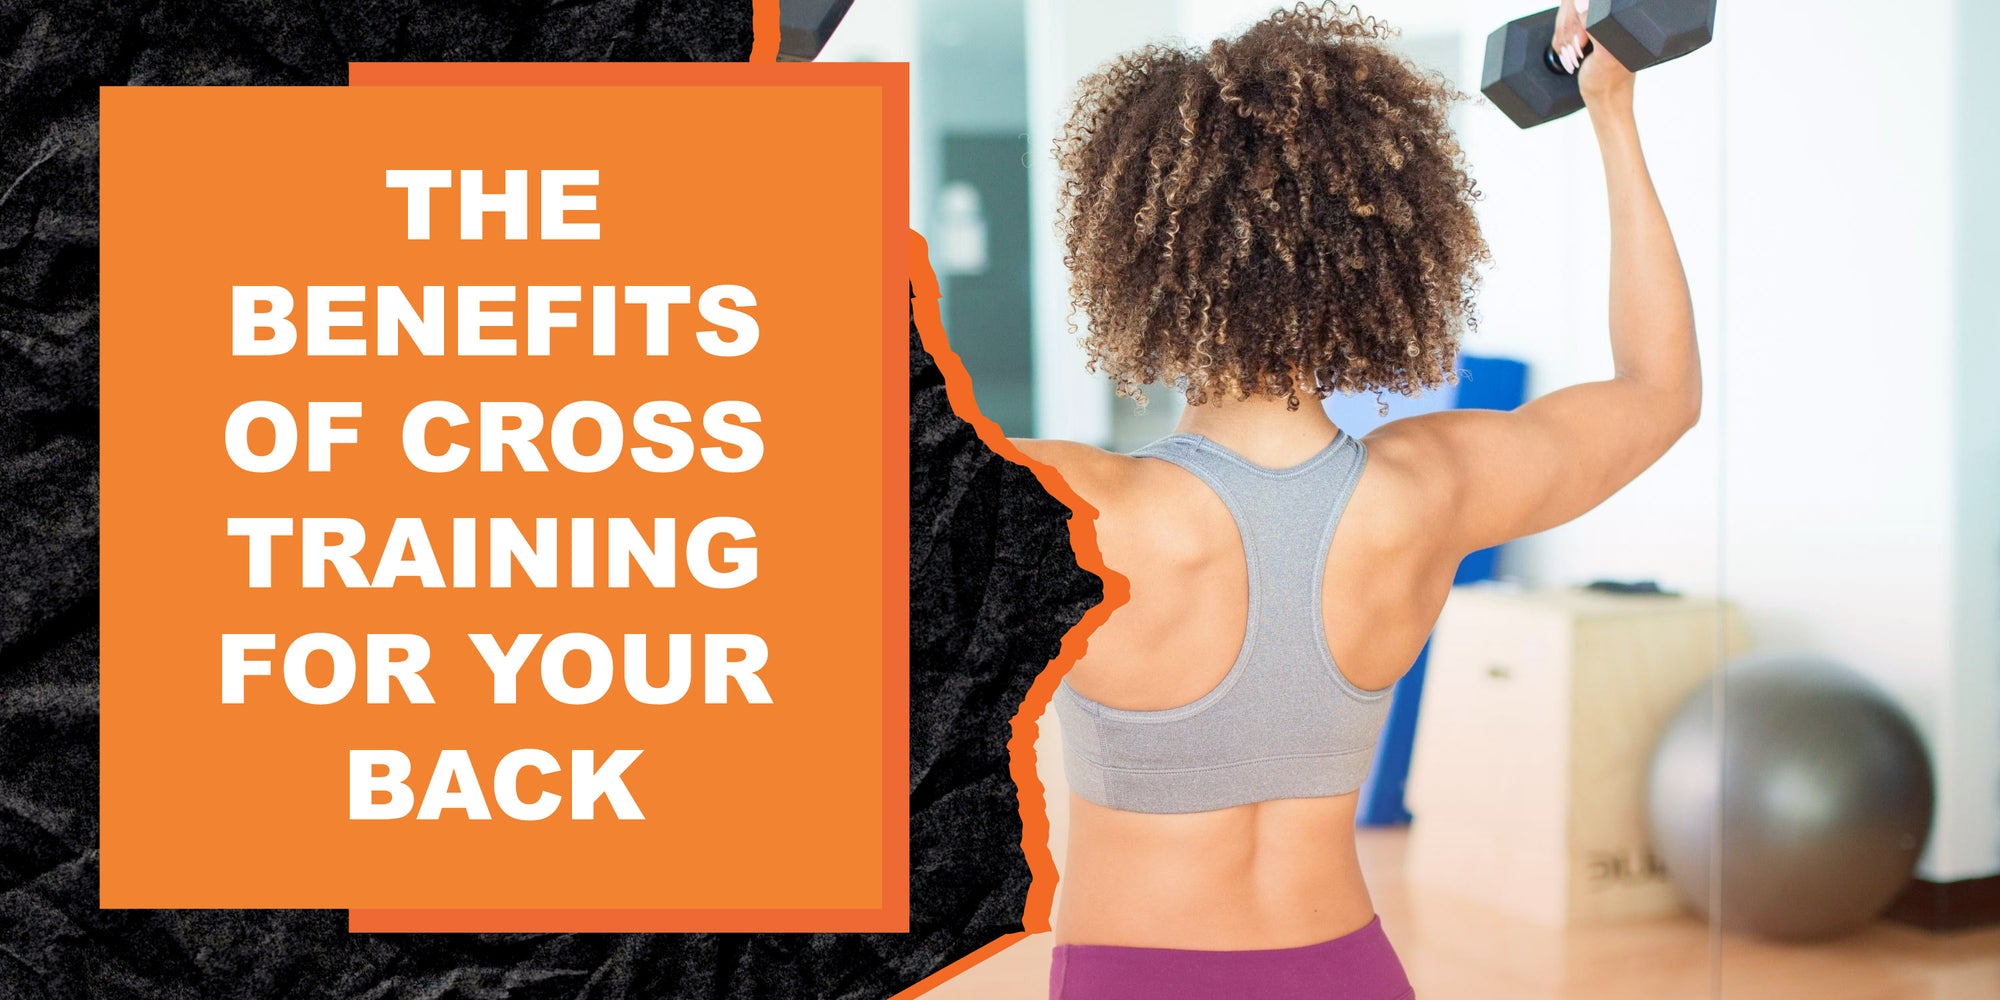 The Benefits of Cross Training for Your Back